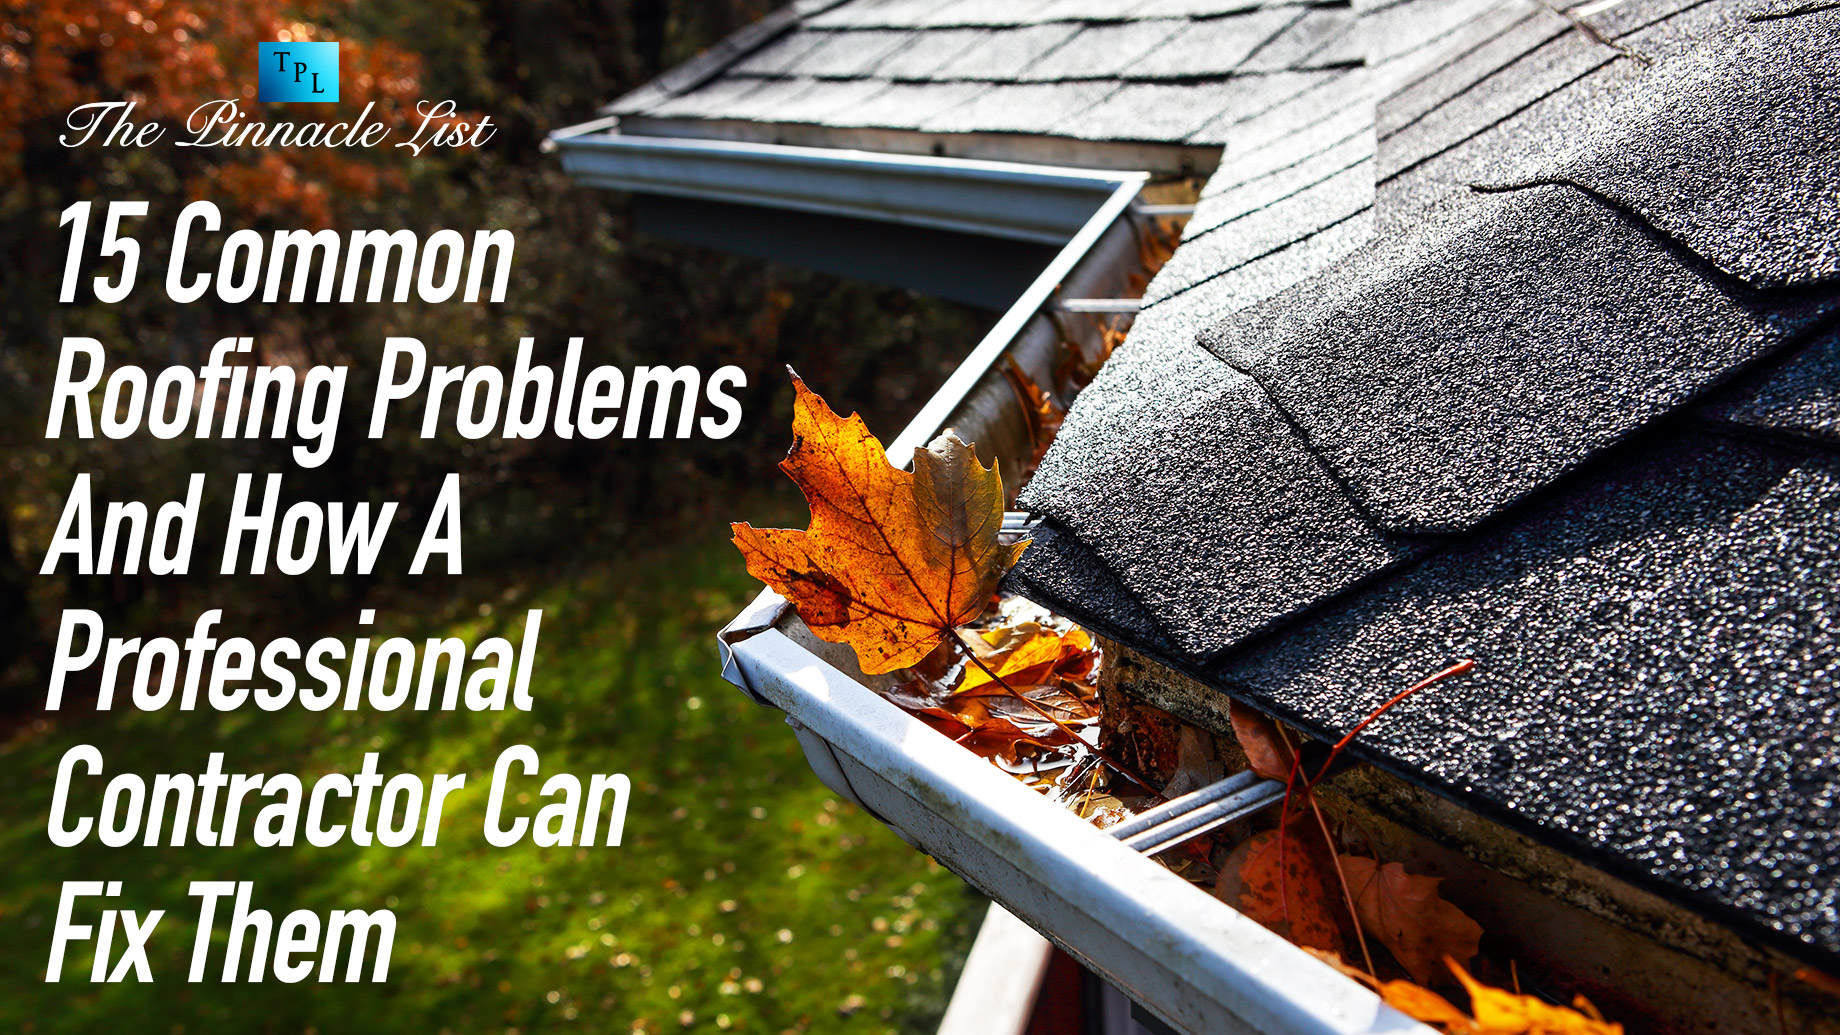 15 Common Roofing Problems And How A Professional Contractor Can Fix Them